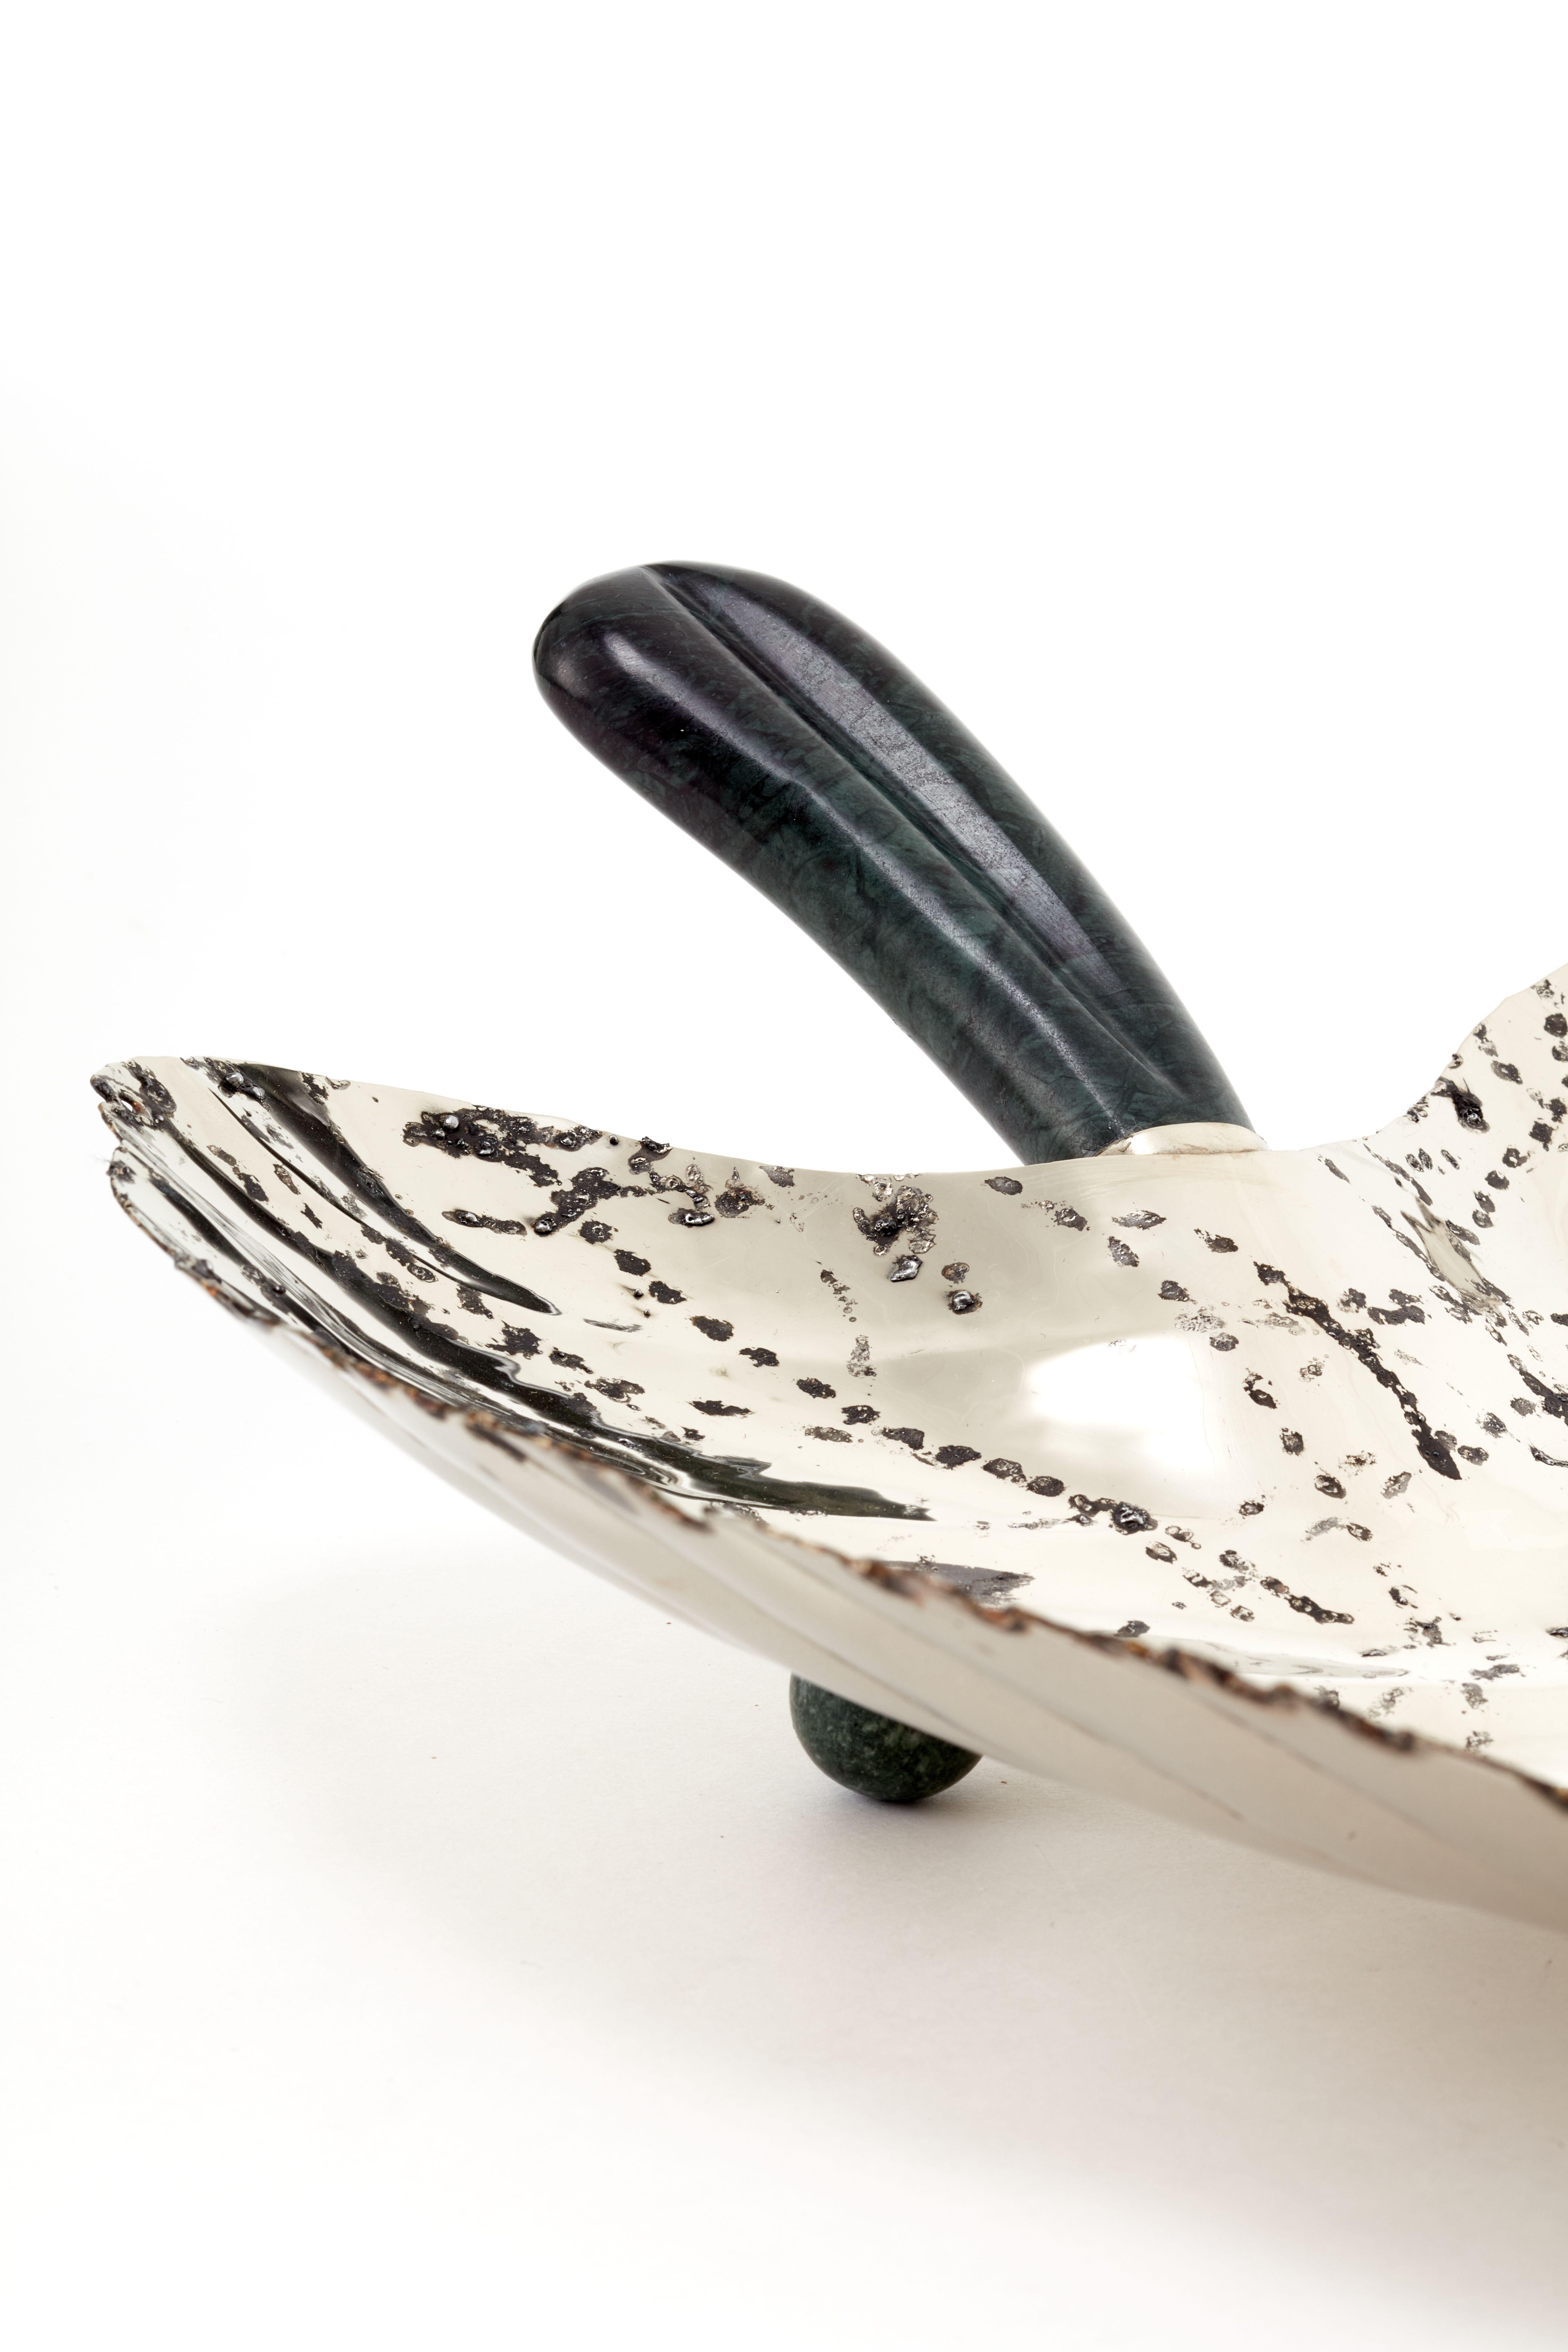 With its beauty and elegant movement and curves, the Chaco leafs brings us the concept for this family of handmade trays with fine alpaca and onyx stone. They are perfect for serving or to display as a decorative piece.

Our pieces are made by hand.